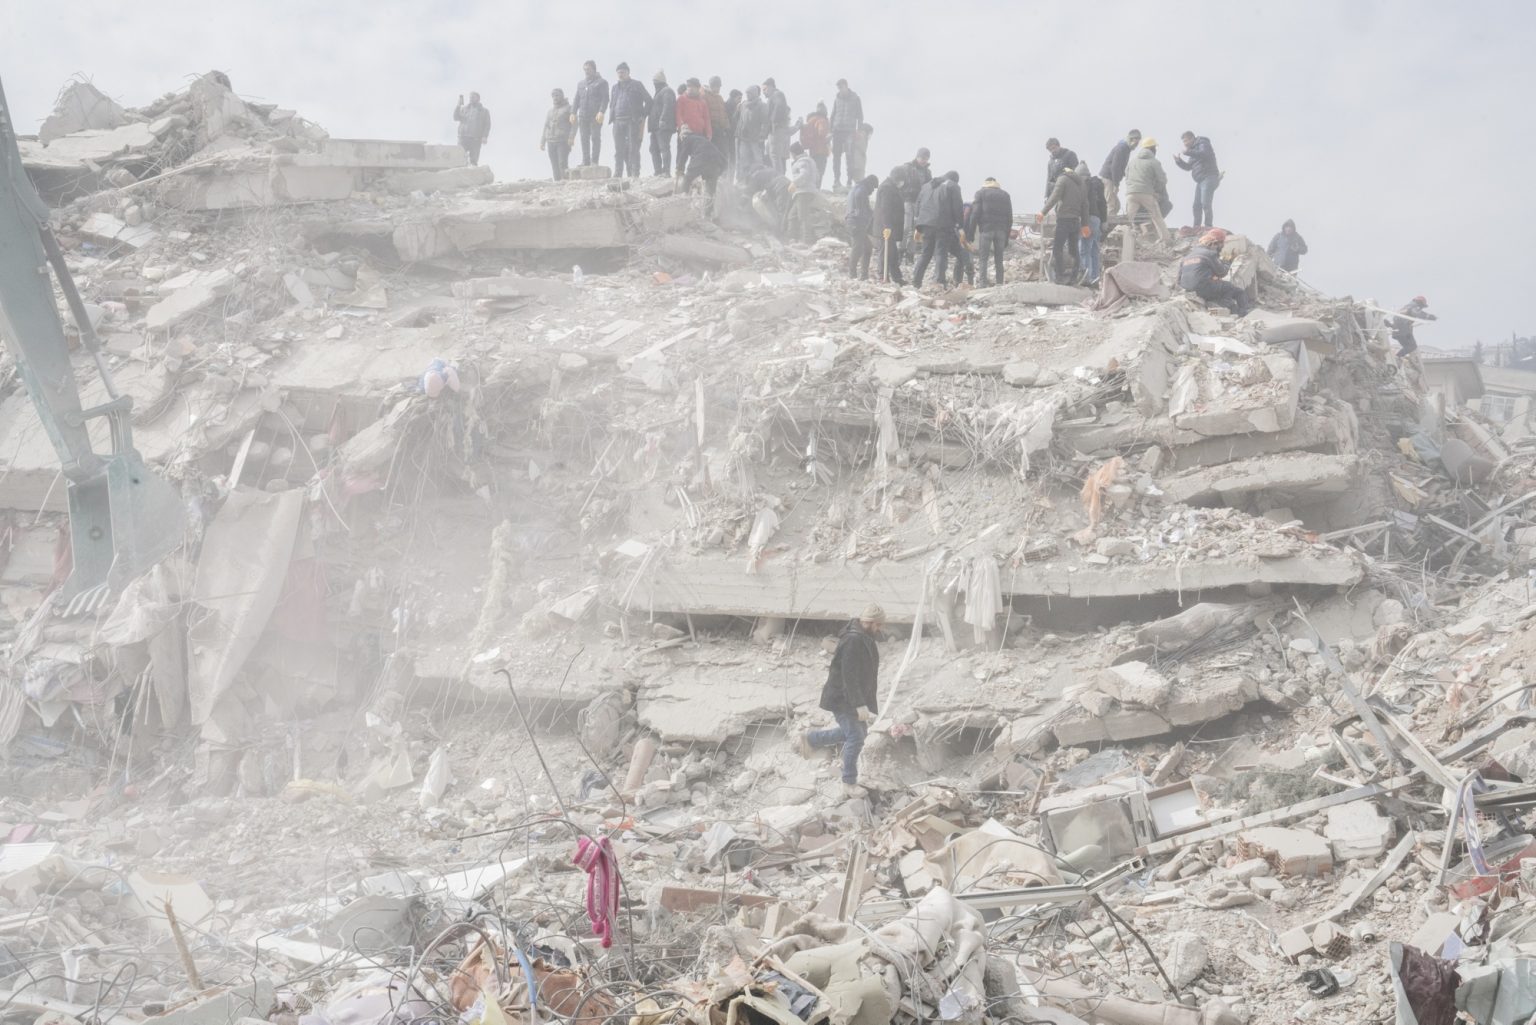 Kahramanmaras¸, Turkey, February 2023 - The aftermath of the earthquake that hit southern Turkey and northern Syria.     A collapsed building in the center of Kahramanmaras¸. ><
Kahramanmaras¸, Turchia, febbraio 2023  Le conseguenze del terremoto che ha colpito la Turchia del Sud e la Siria del nord.